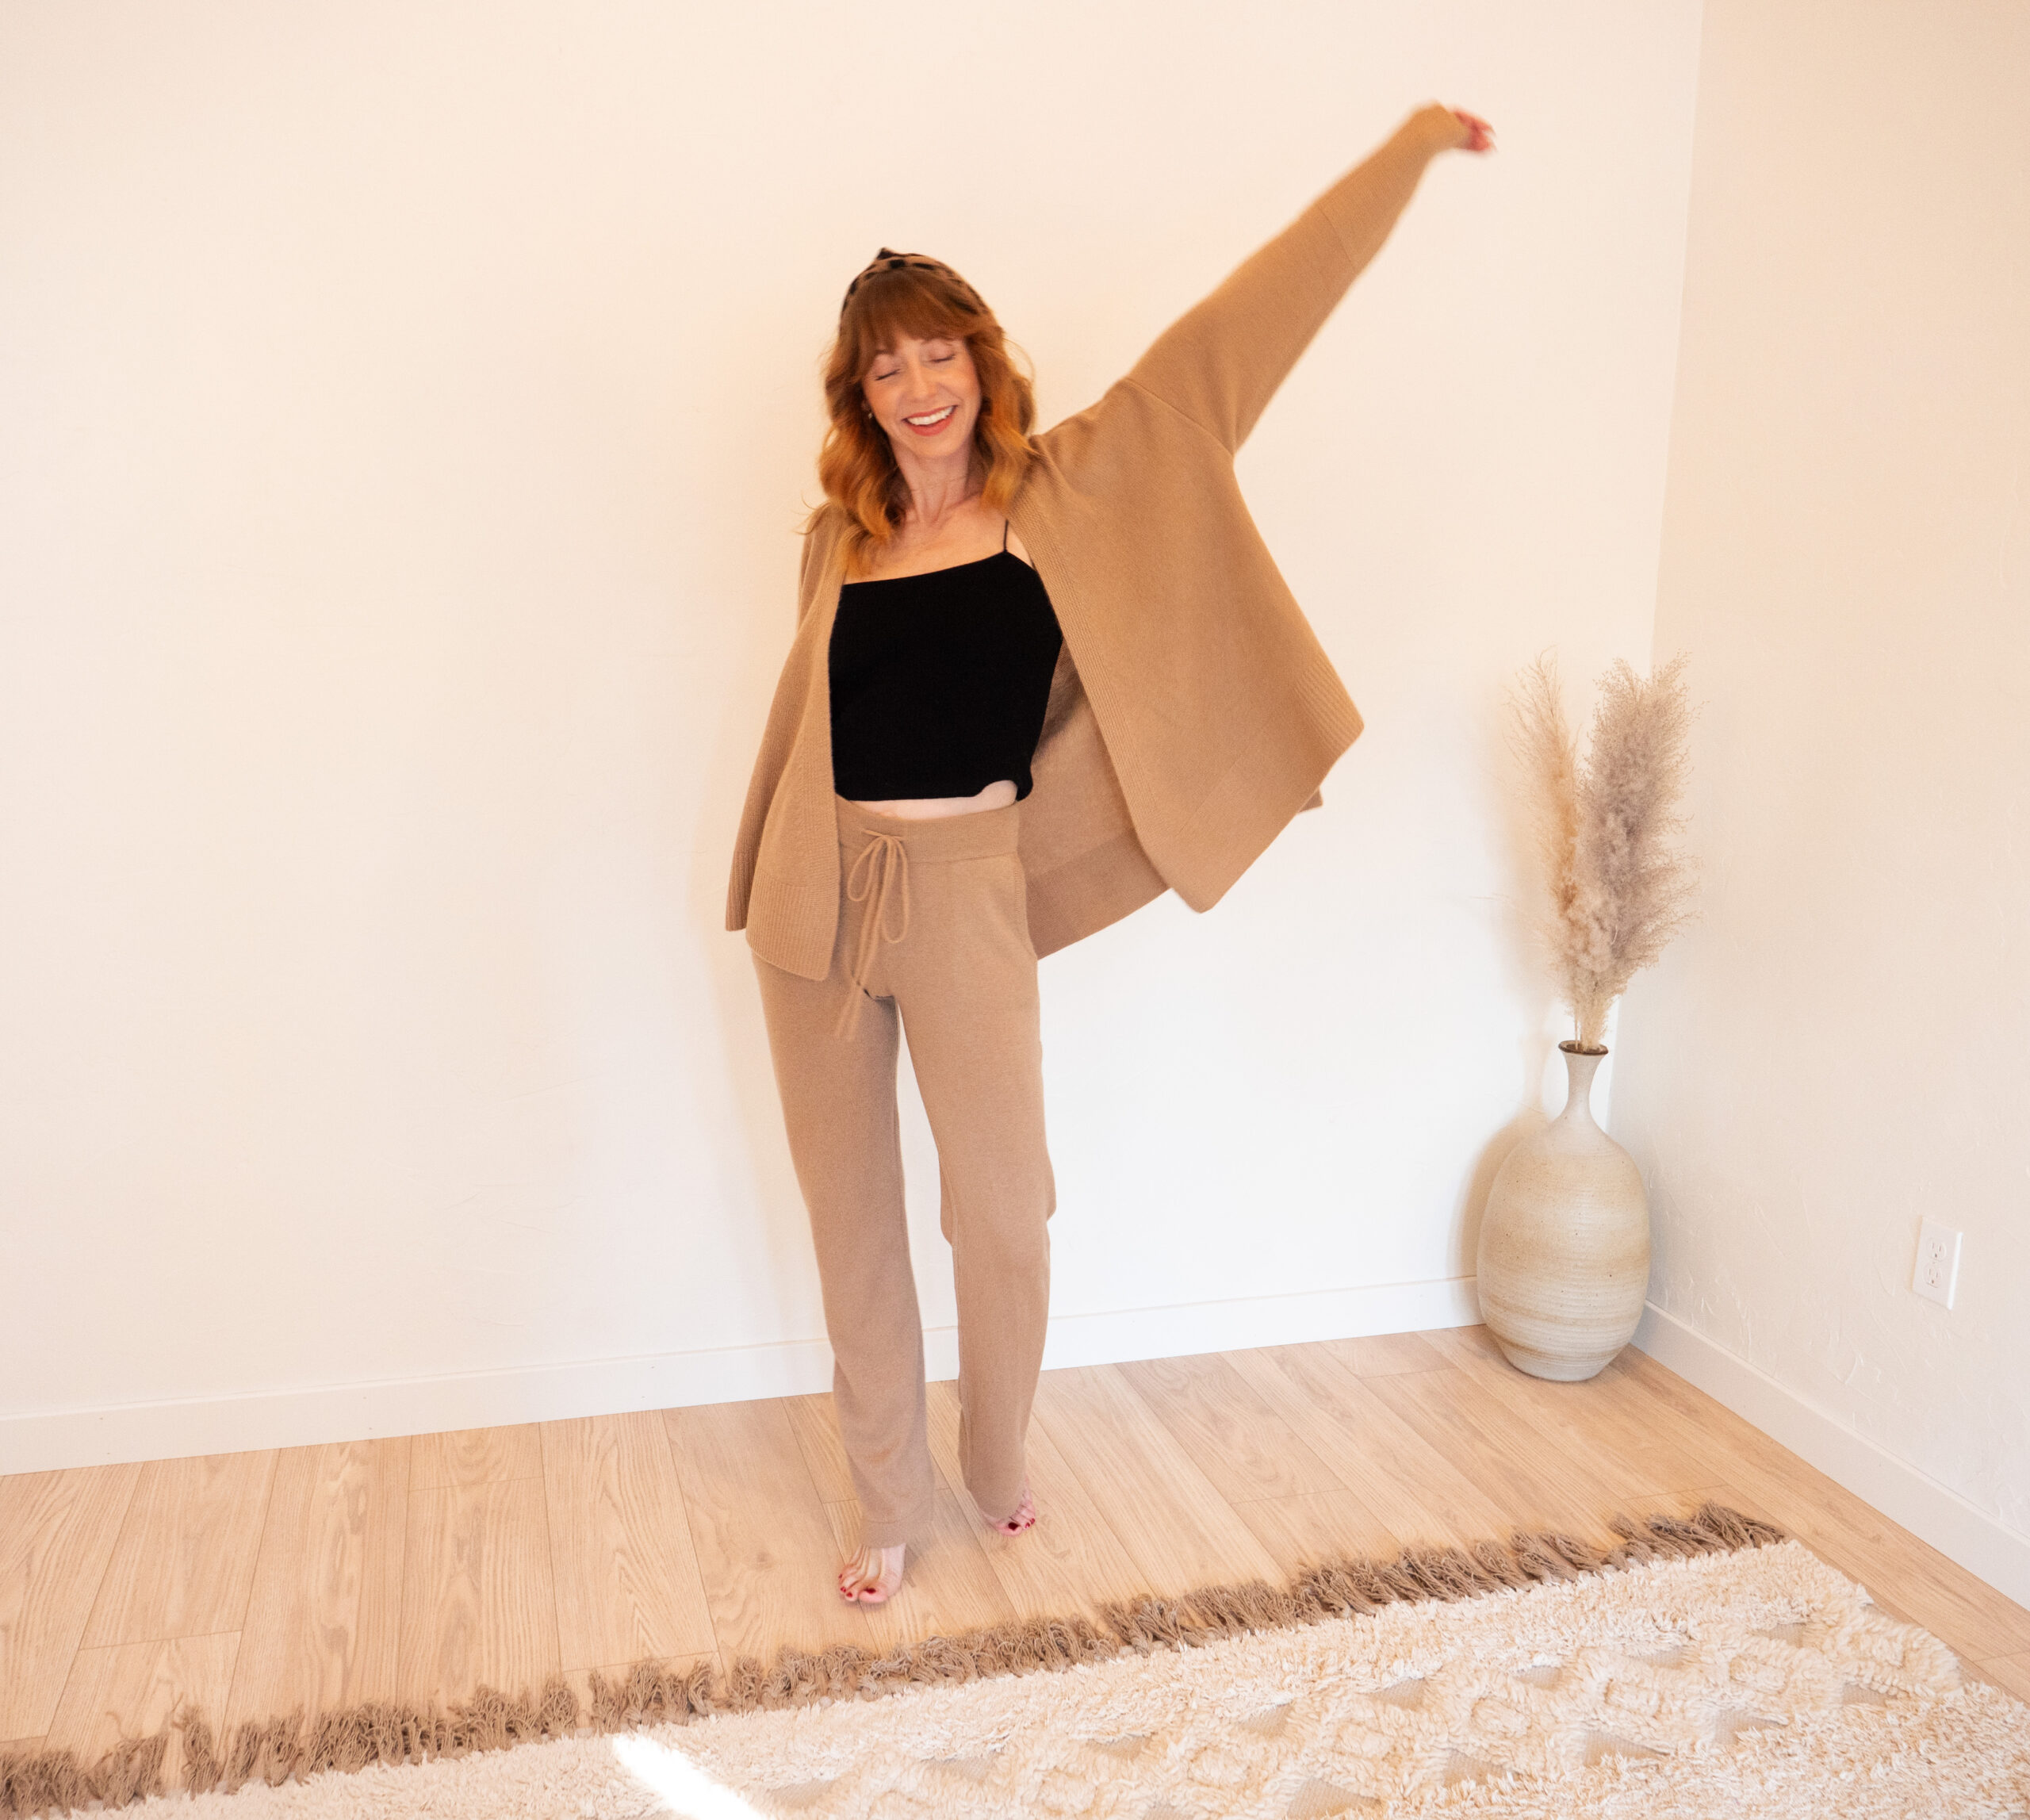 A woman standing in a room wearing a tan sweater and pants.